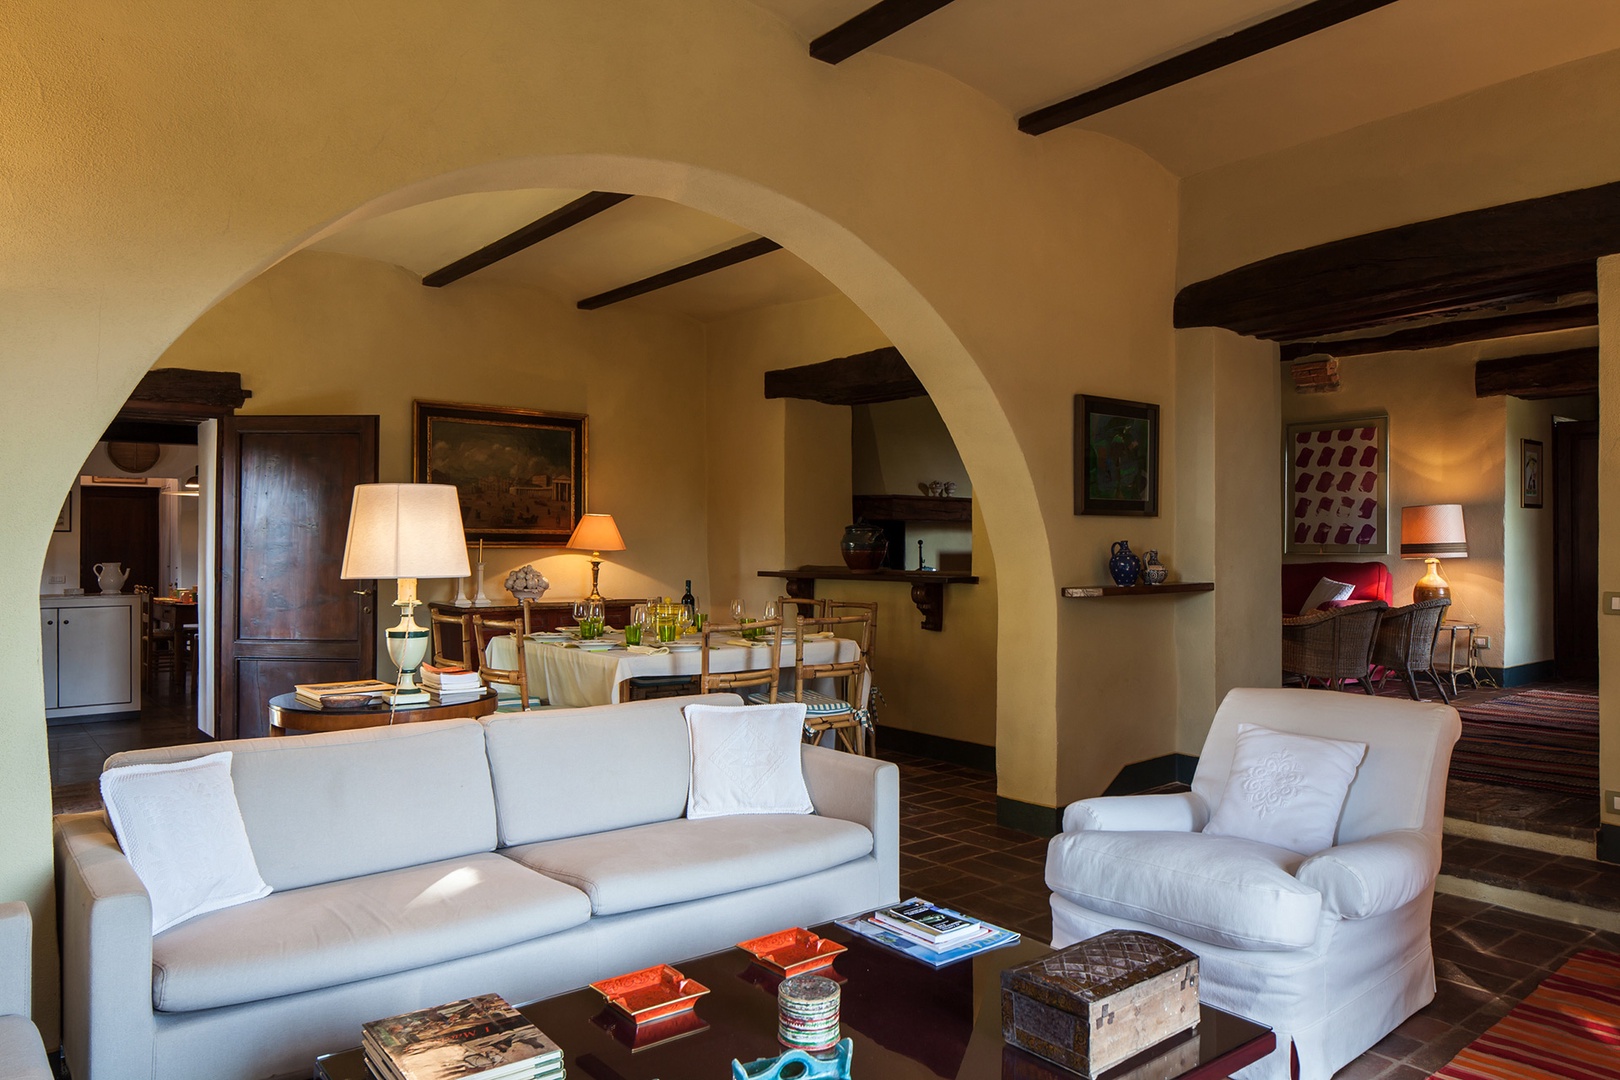 The living room of Albero is at the heart of the house and has windows that open onto the garden.